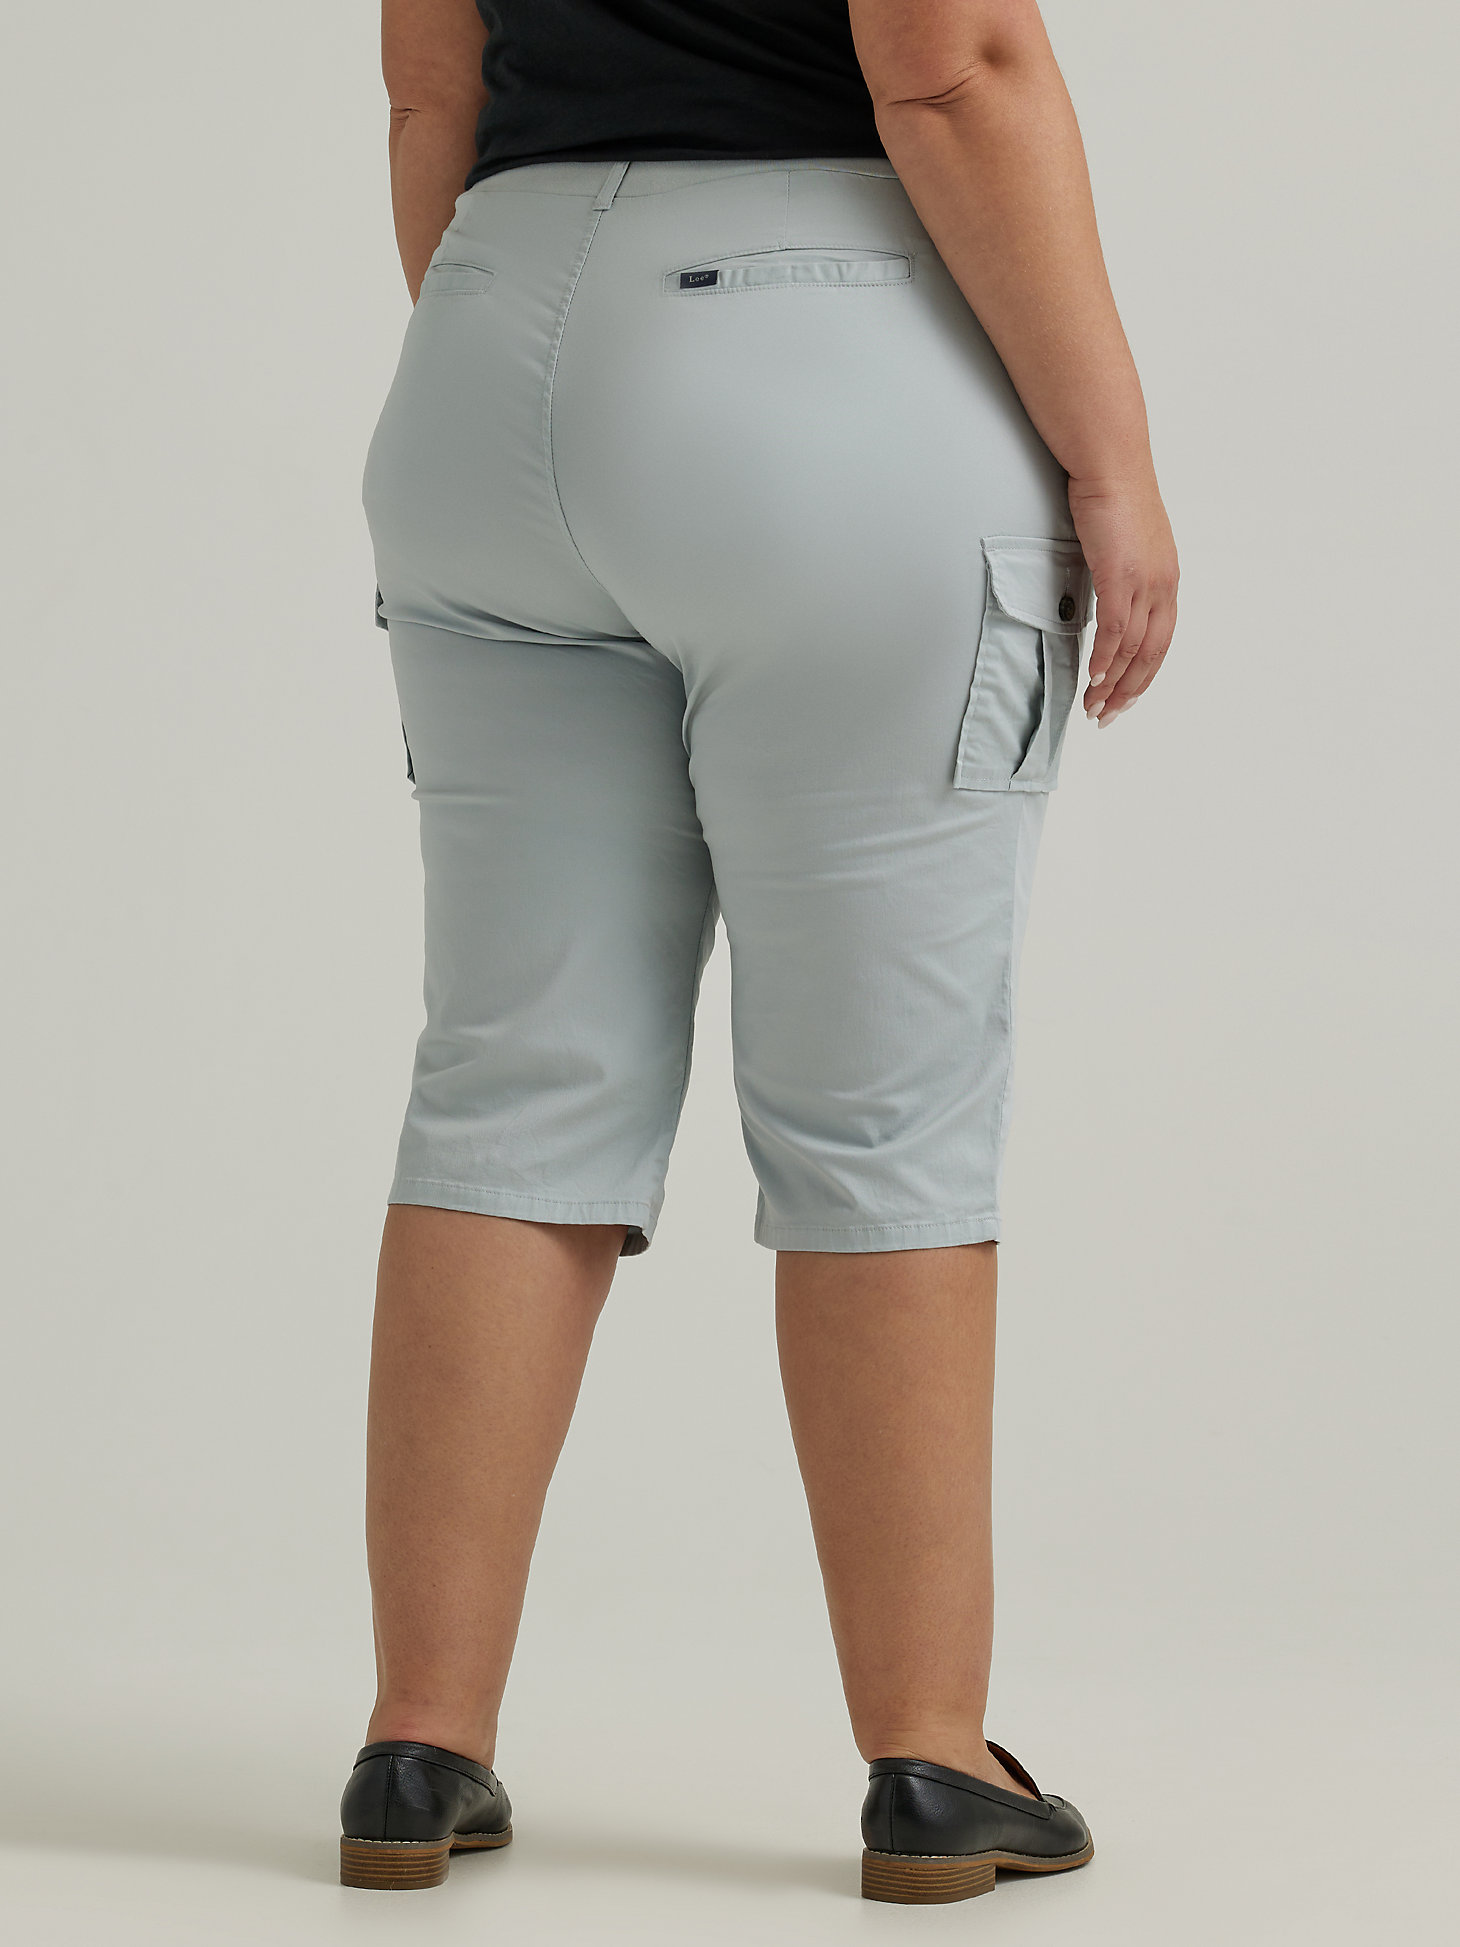 Women's Ultra Lux with Flex-to-Go Relaxed Cargo Skimmer (Plus) in Summer Haze alternative view 1